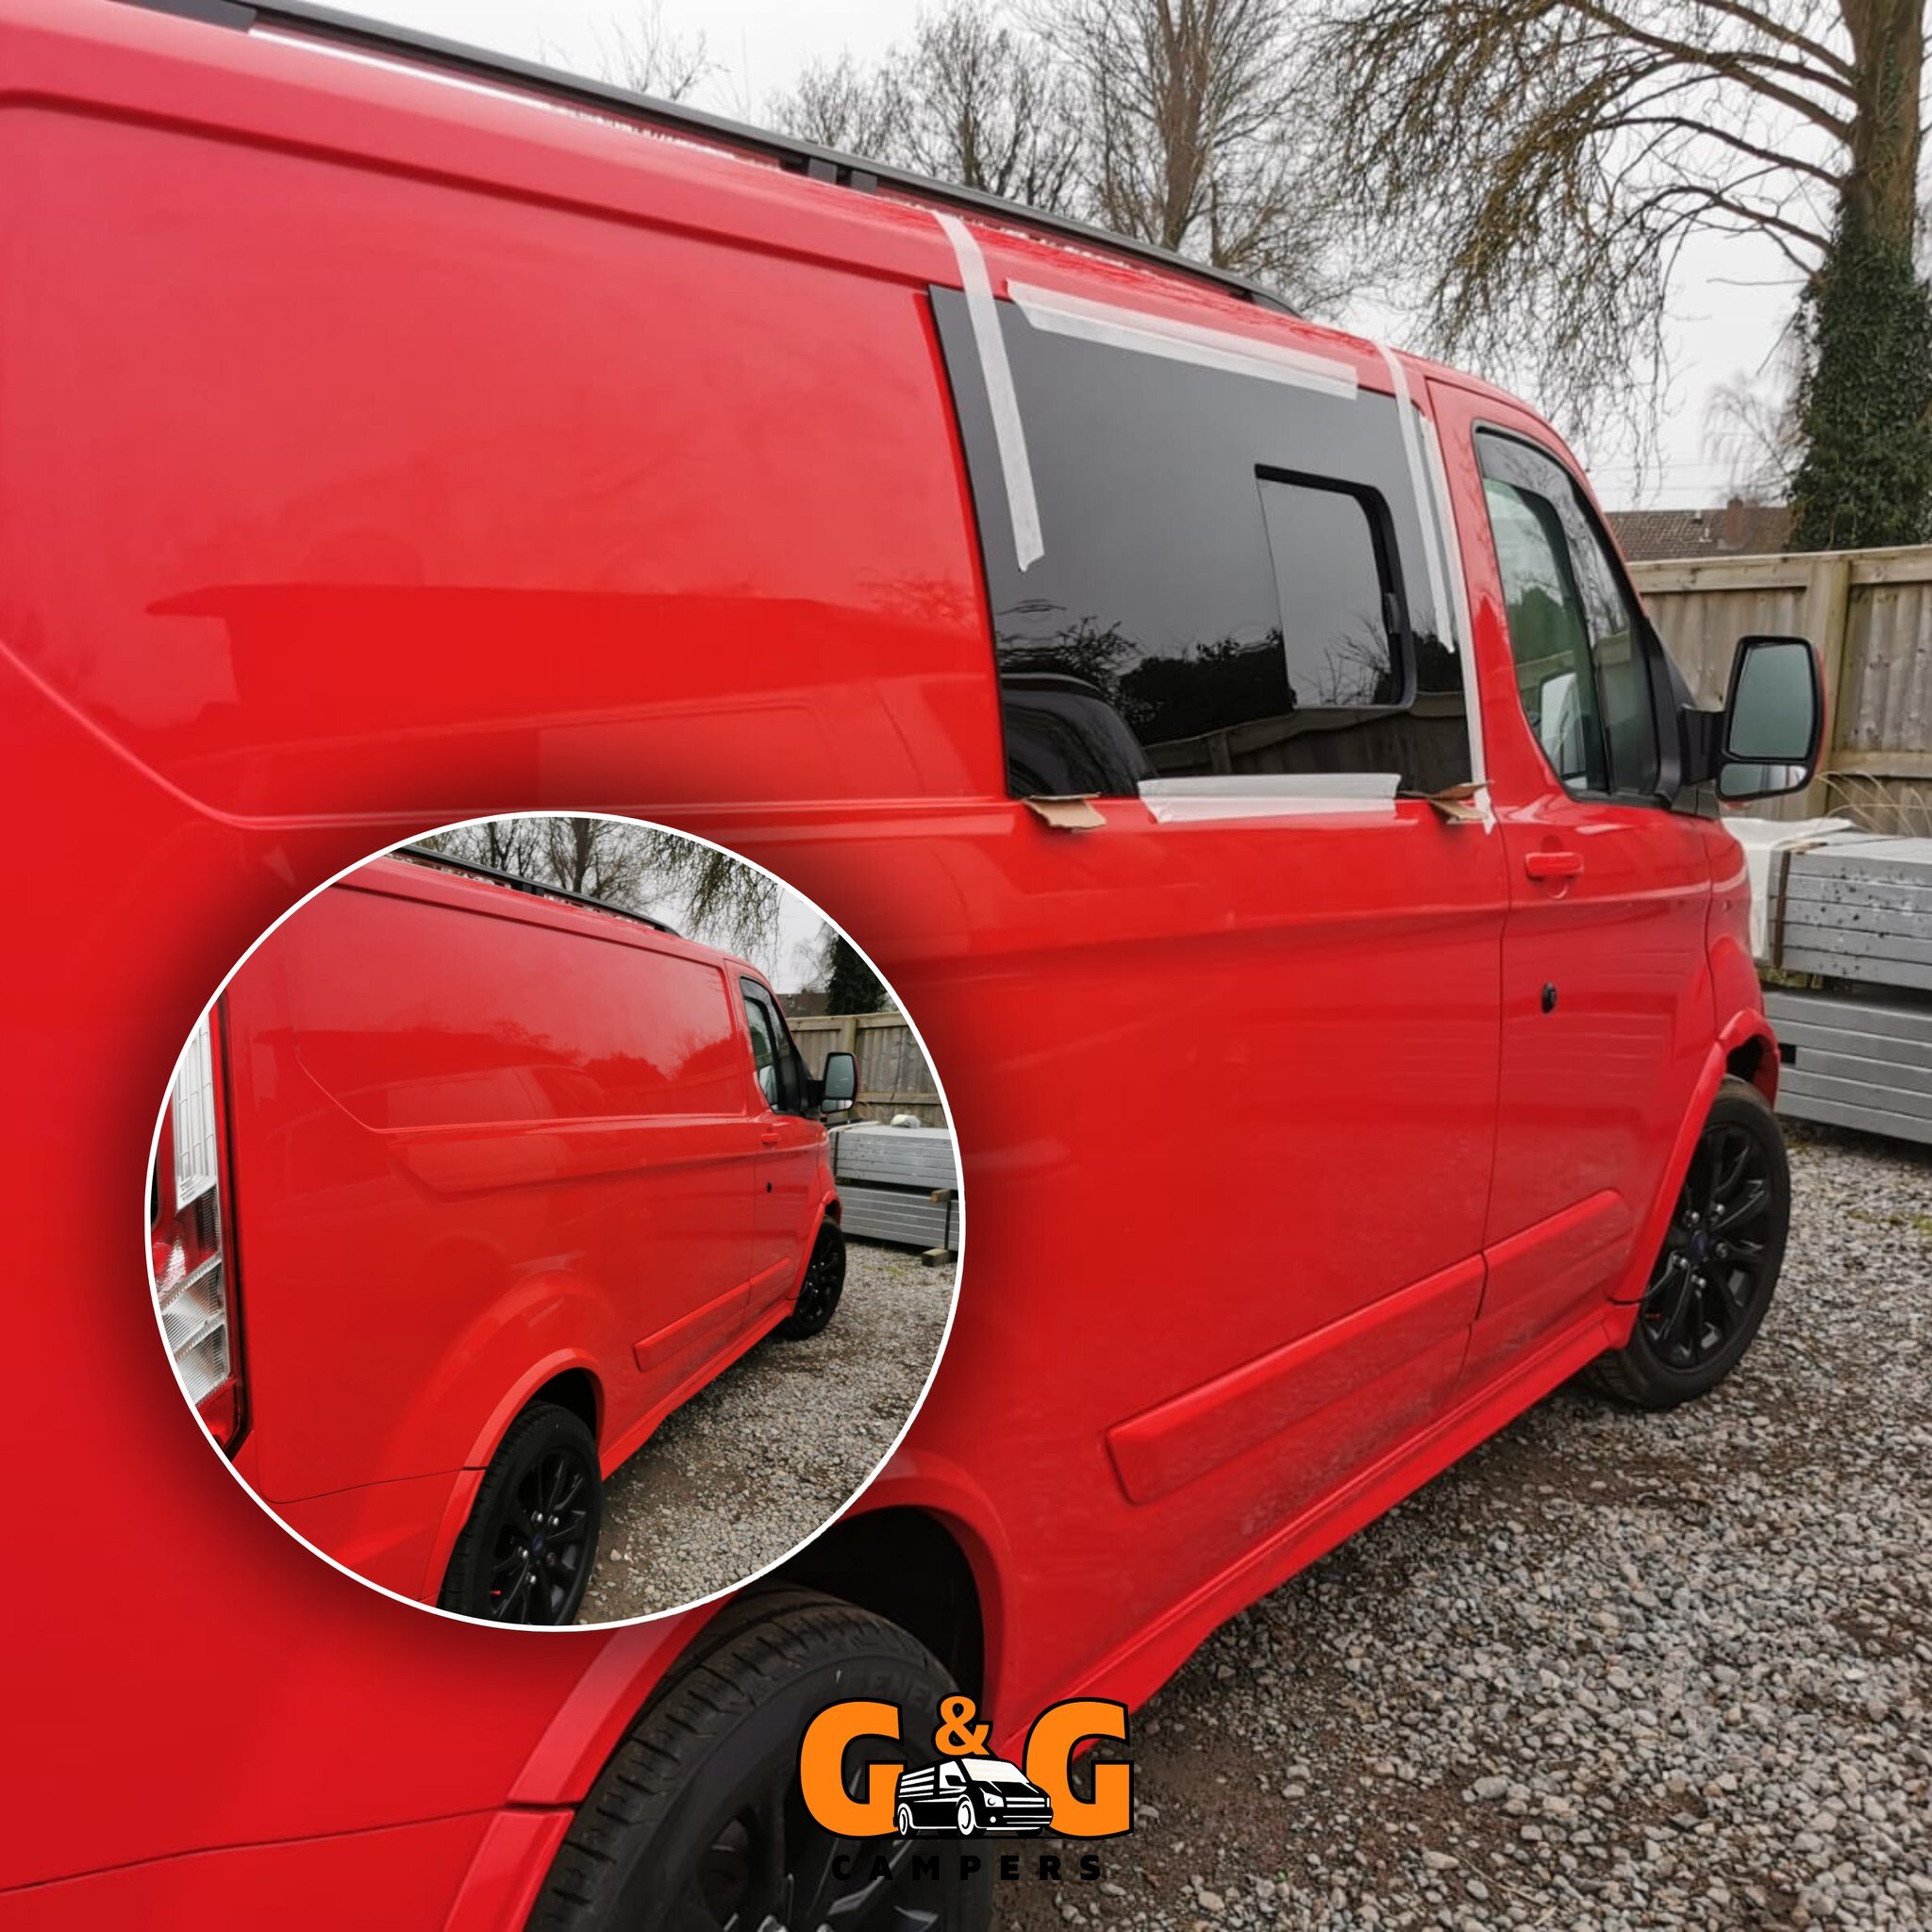 Did you know that we offer a window fitting service? 🪟

Are you looking to add light inside your van or just replace you clear glass with a sliding window in privacy tint? Get in contact to discuss your needs! 📞

Prices start at &pound;150+VAT 💰

